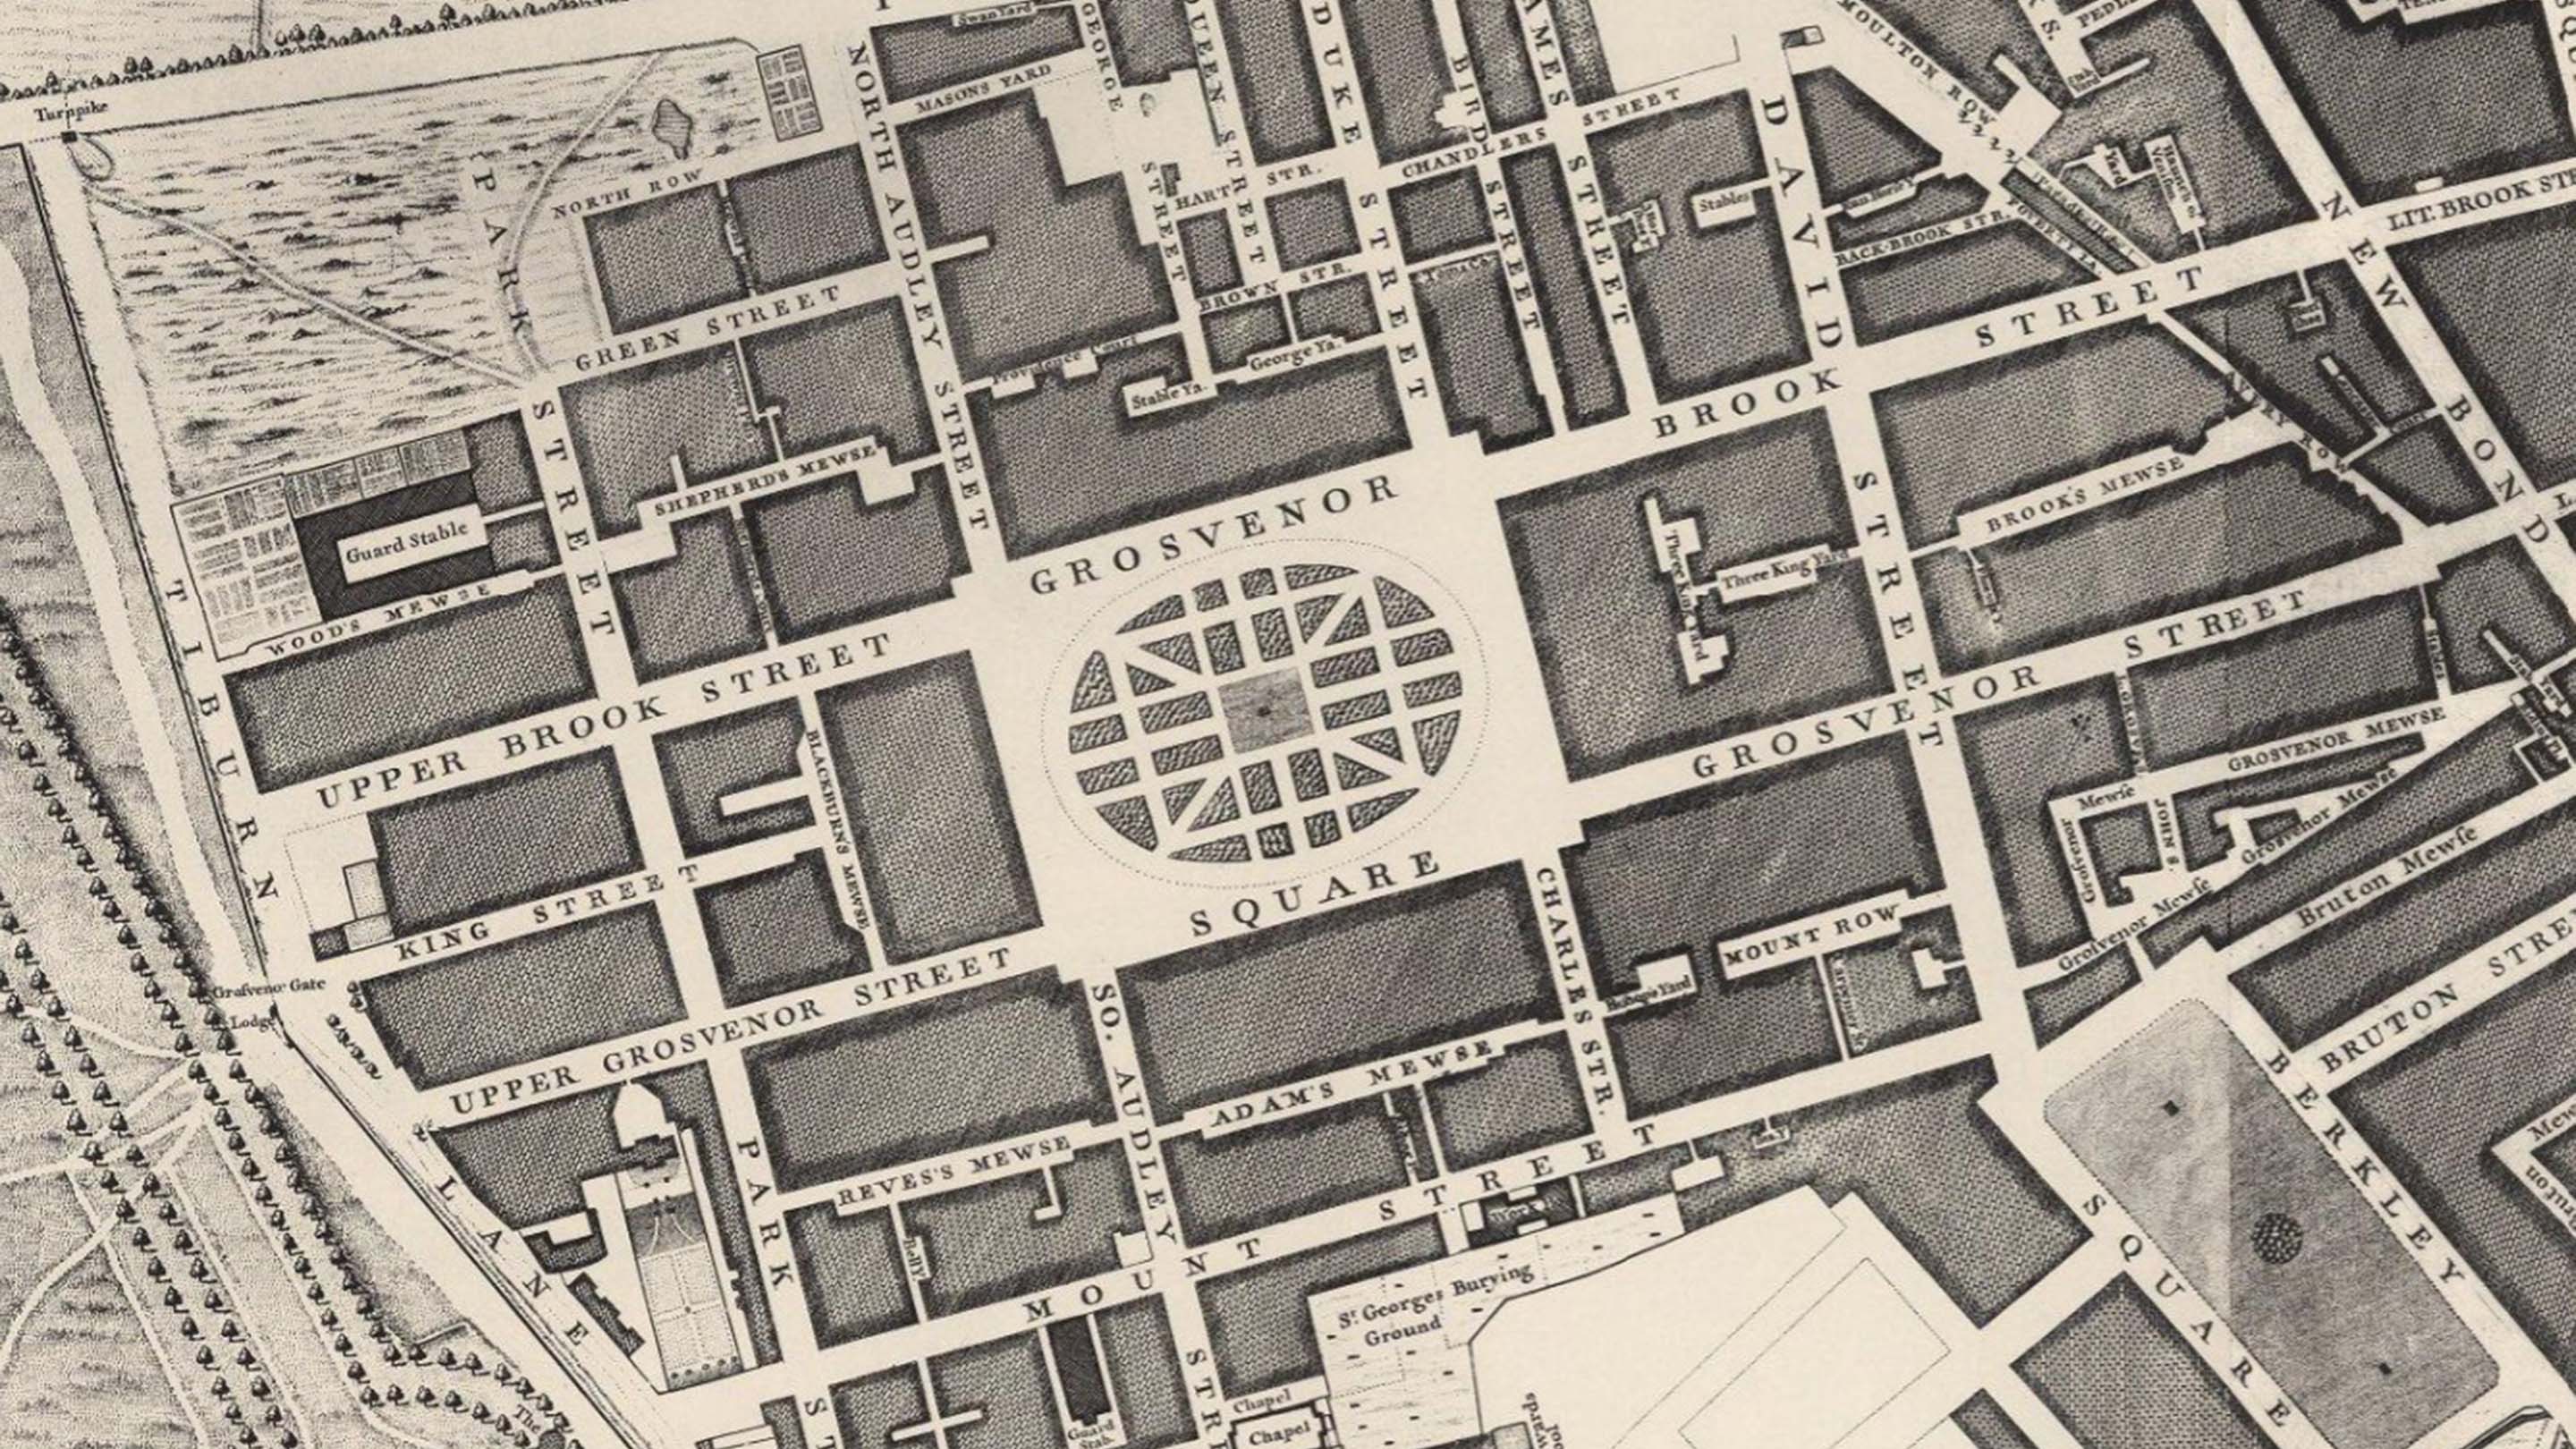 Grosvenor Square, as featured on John Rocque’s 1746 map of London (image credit David Rumsey Map Collection, David Rumsey Map Center, Stanford Libraries)